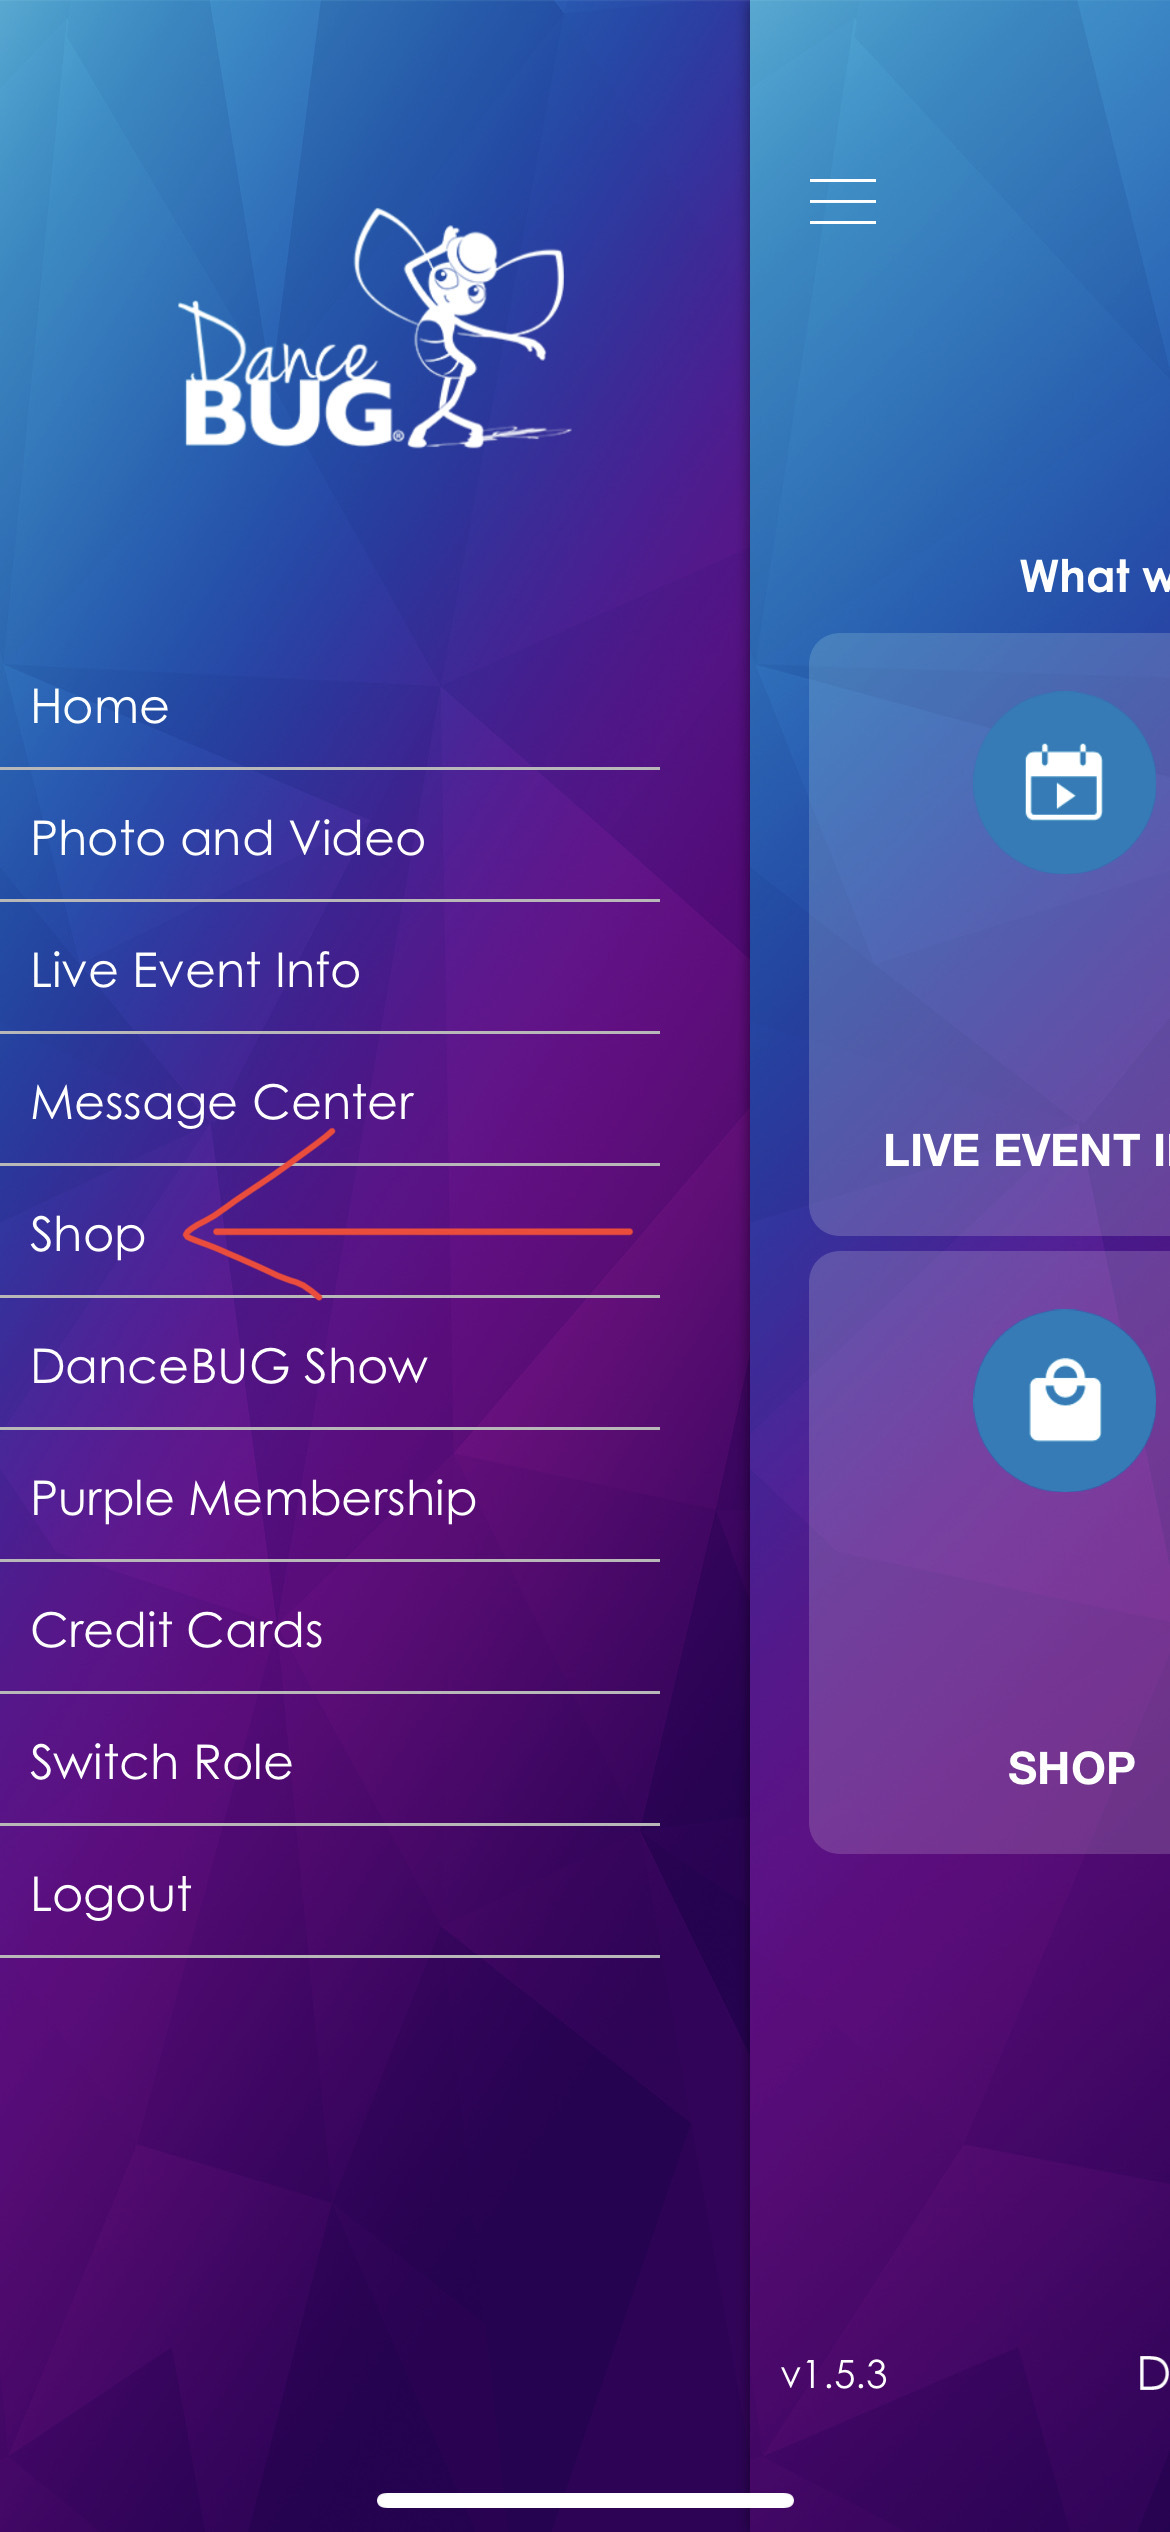 how to download videos from dancebug